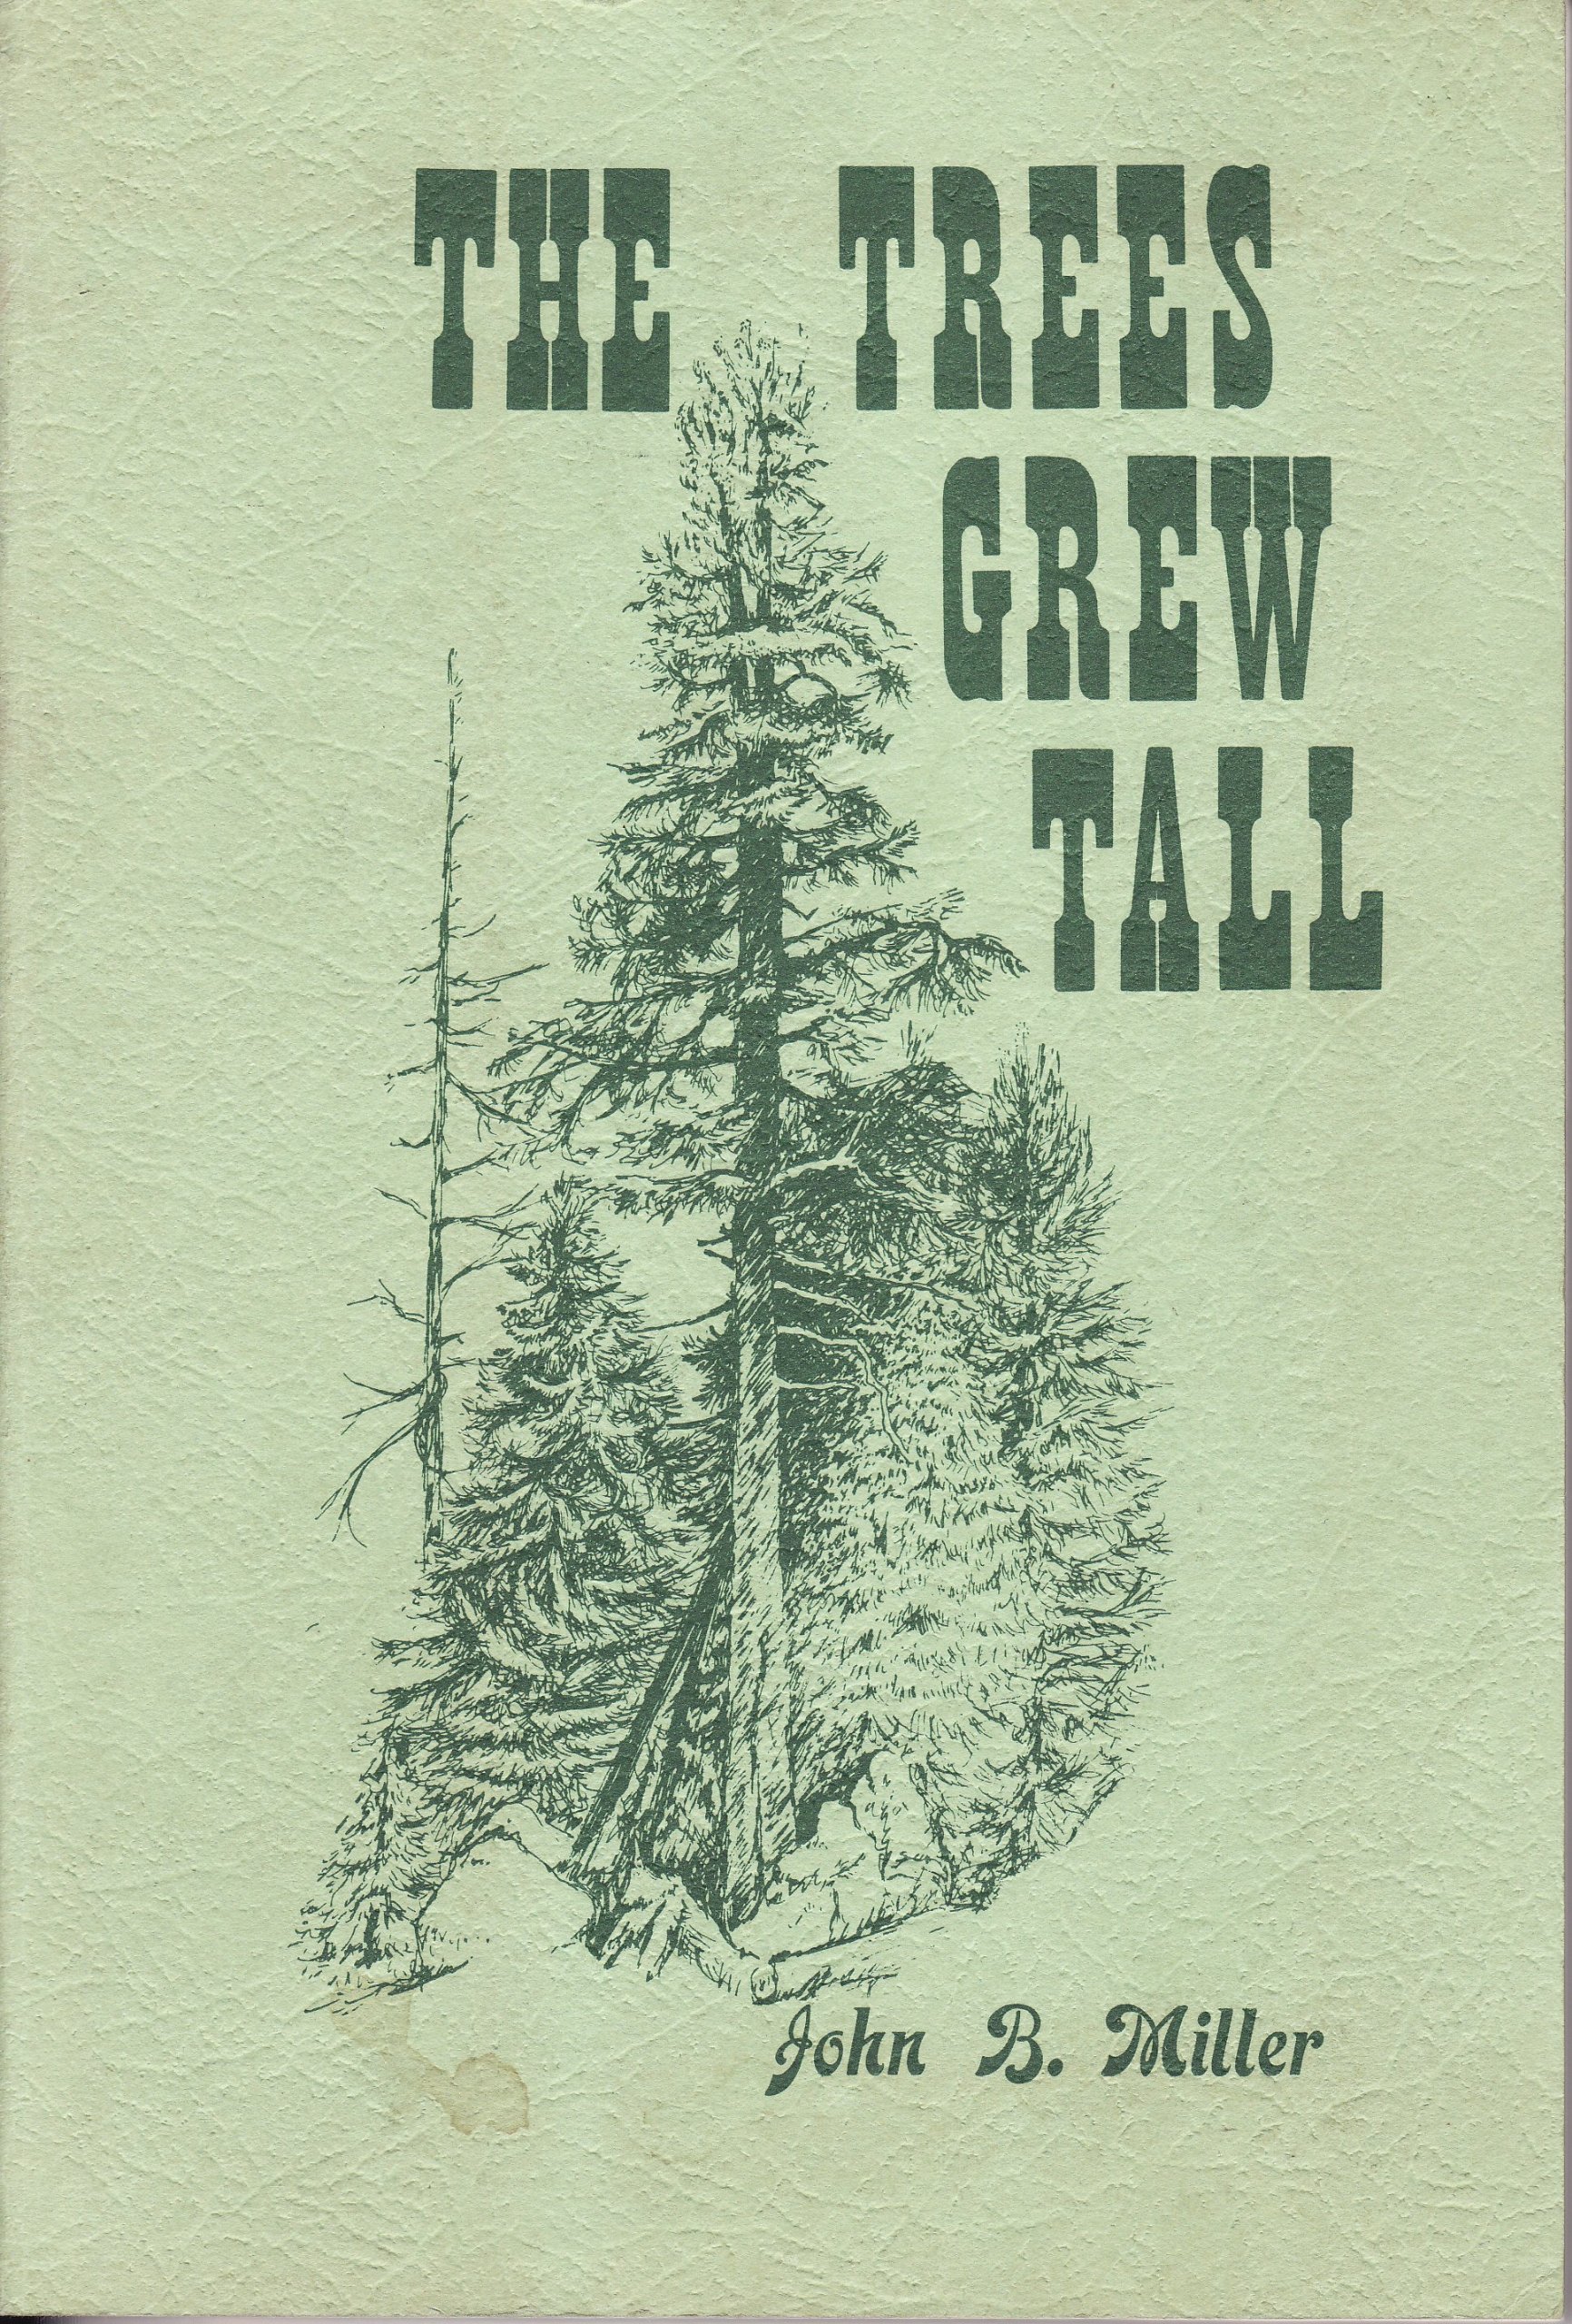 The Trees grew tall (book cover)